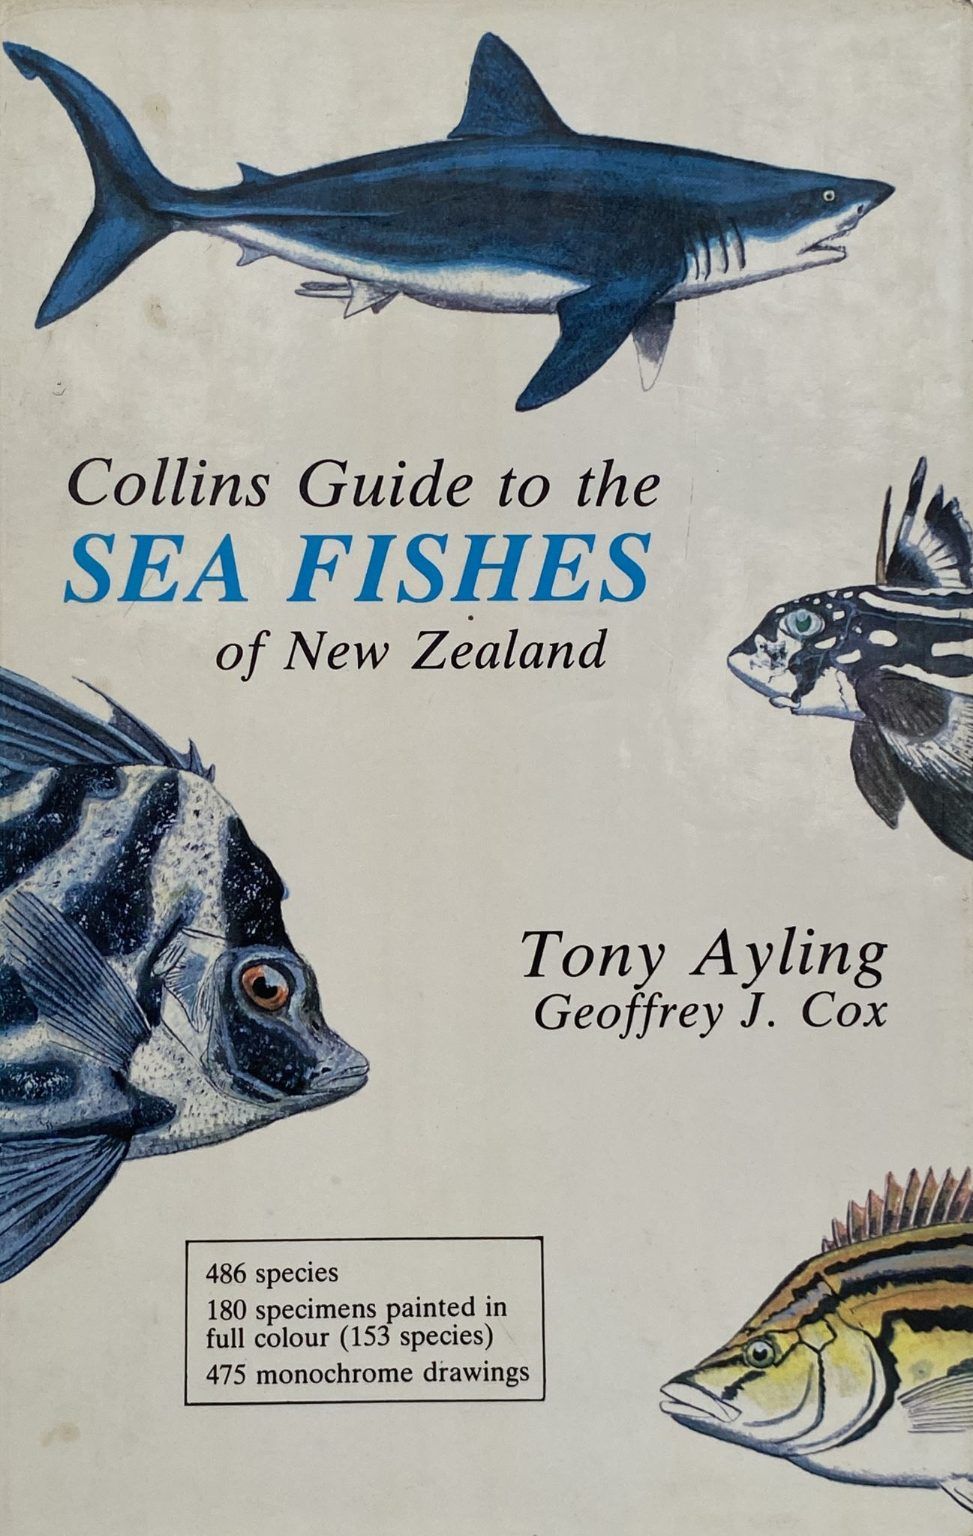 COLLINS GUIDE TO THE SEA FISHES of New Zealand